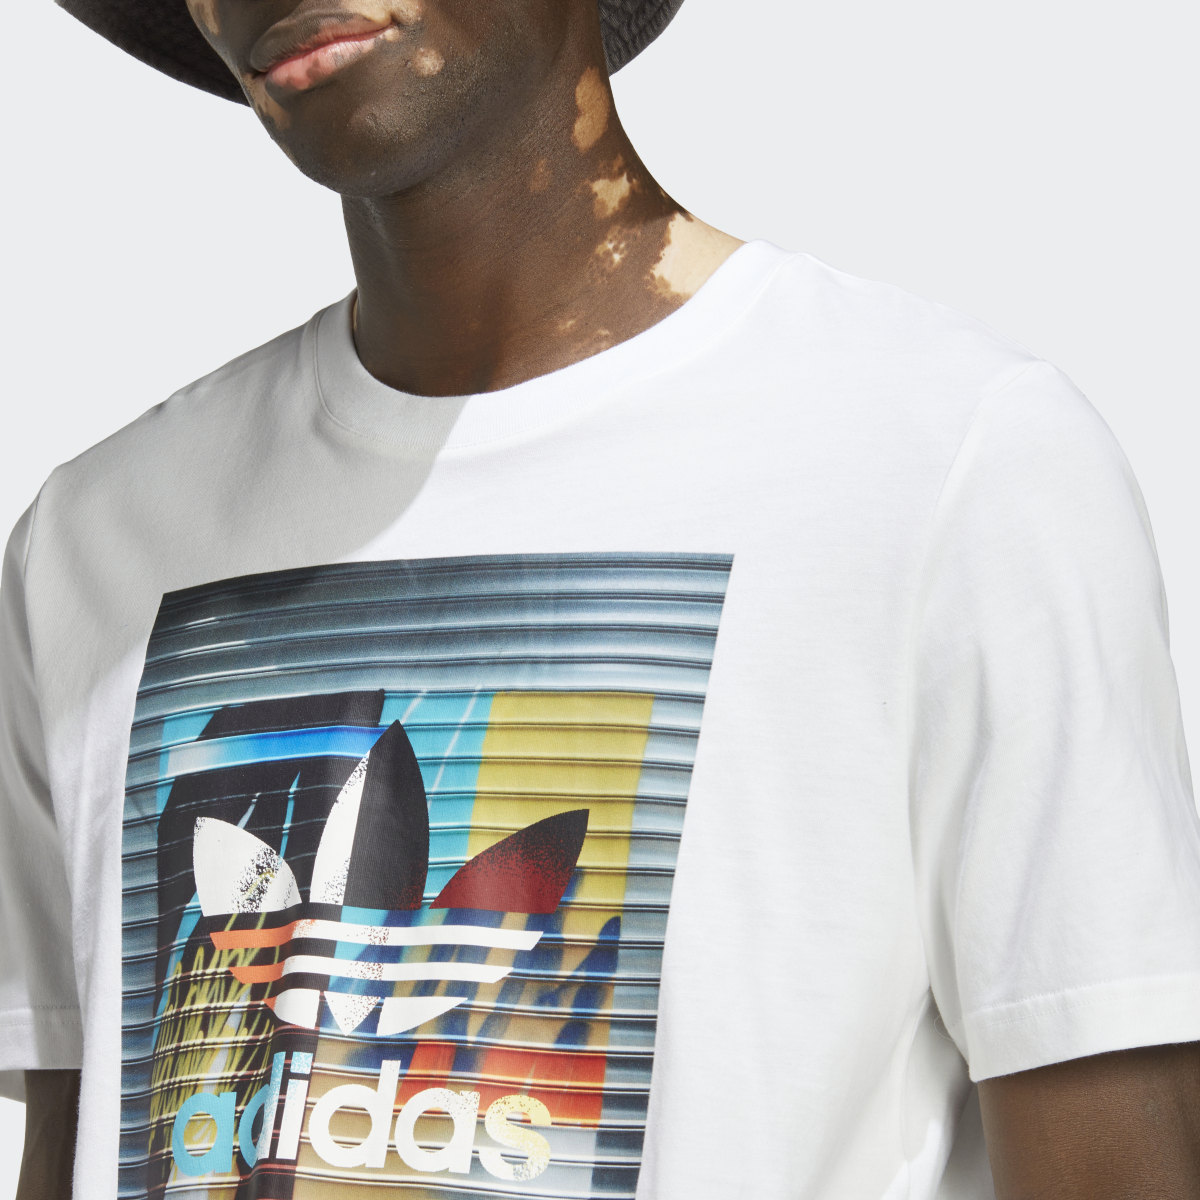 Adidas Graphics off the Grid T-Shirt. 6